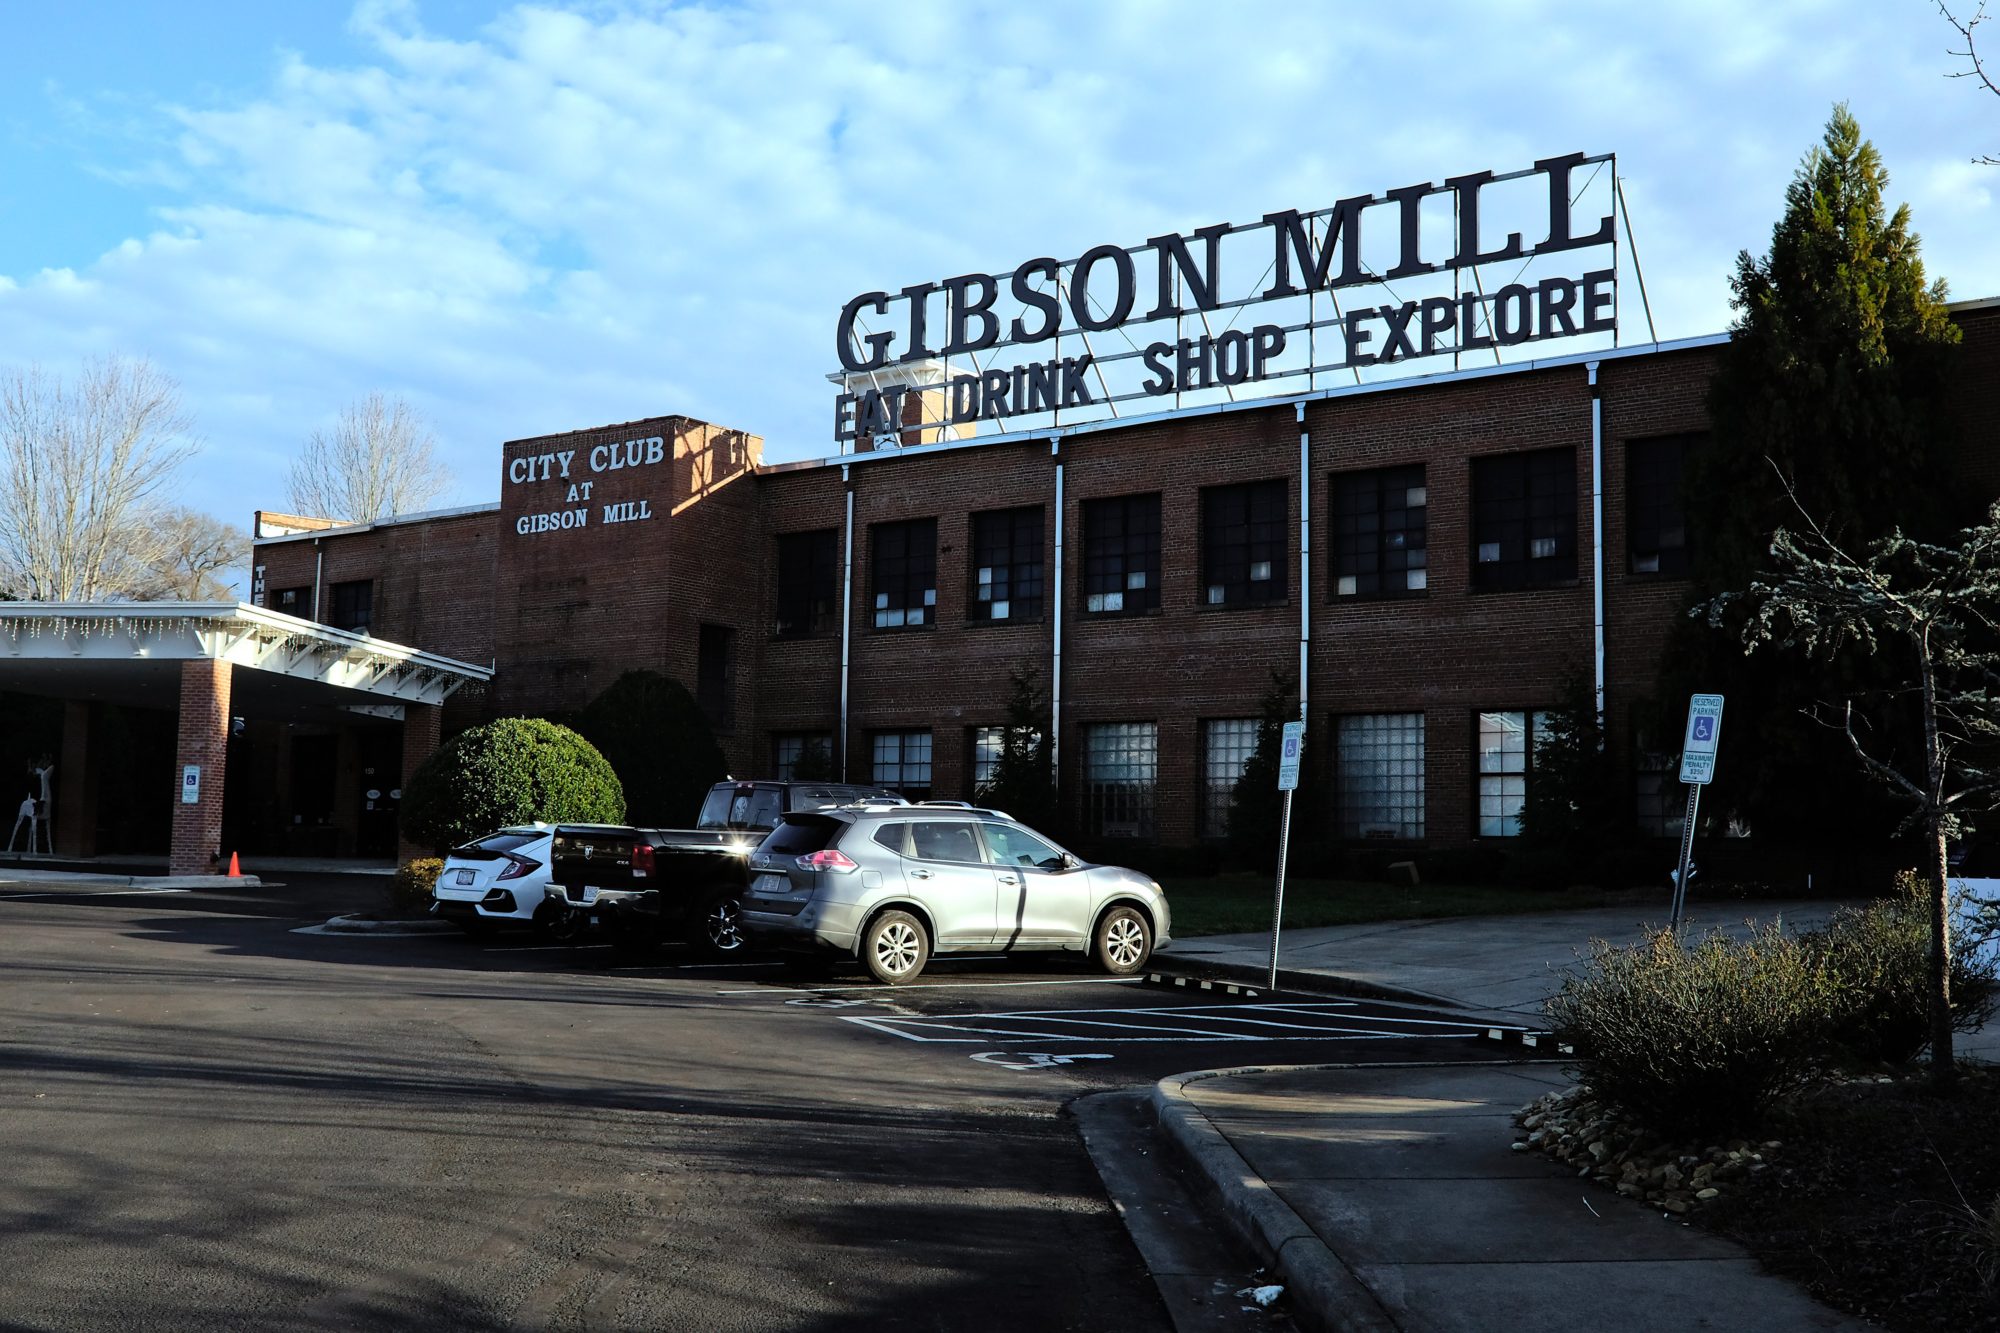 Exterior of Gibson Mill with its sign that reads "Eat Drink Shop Explore"